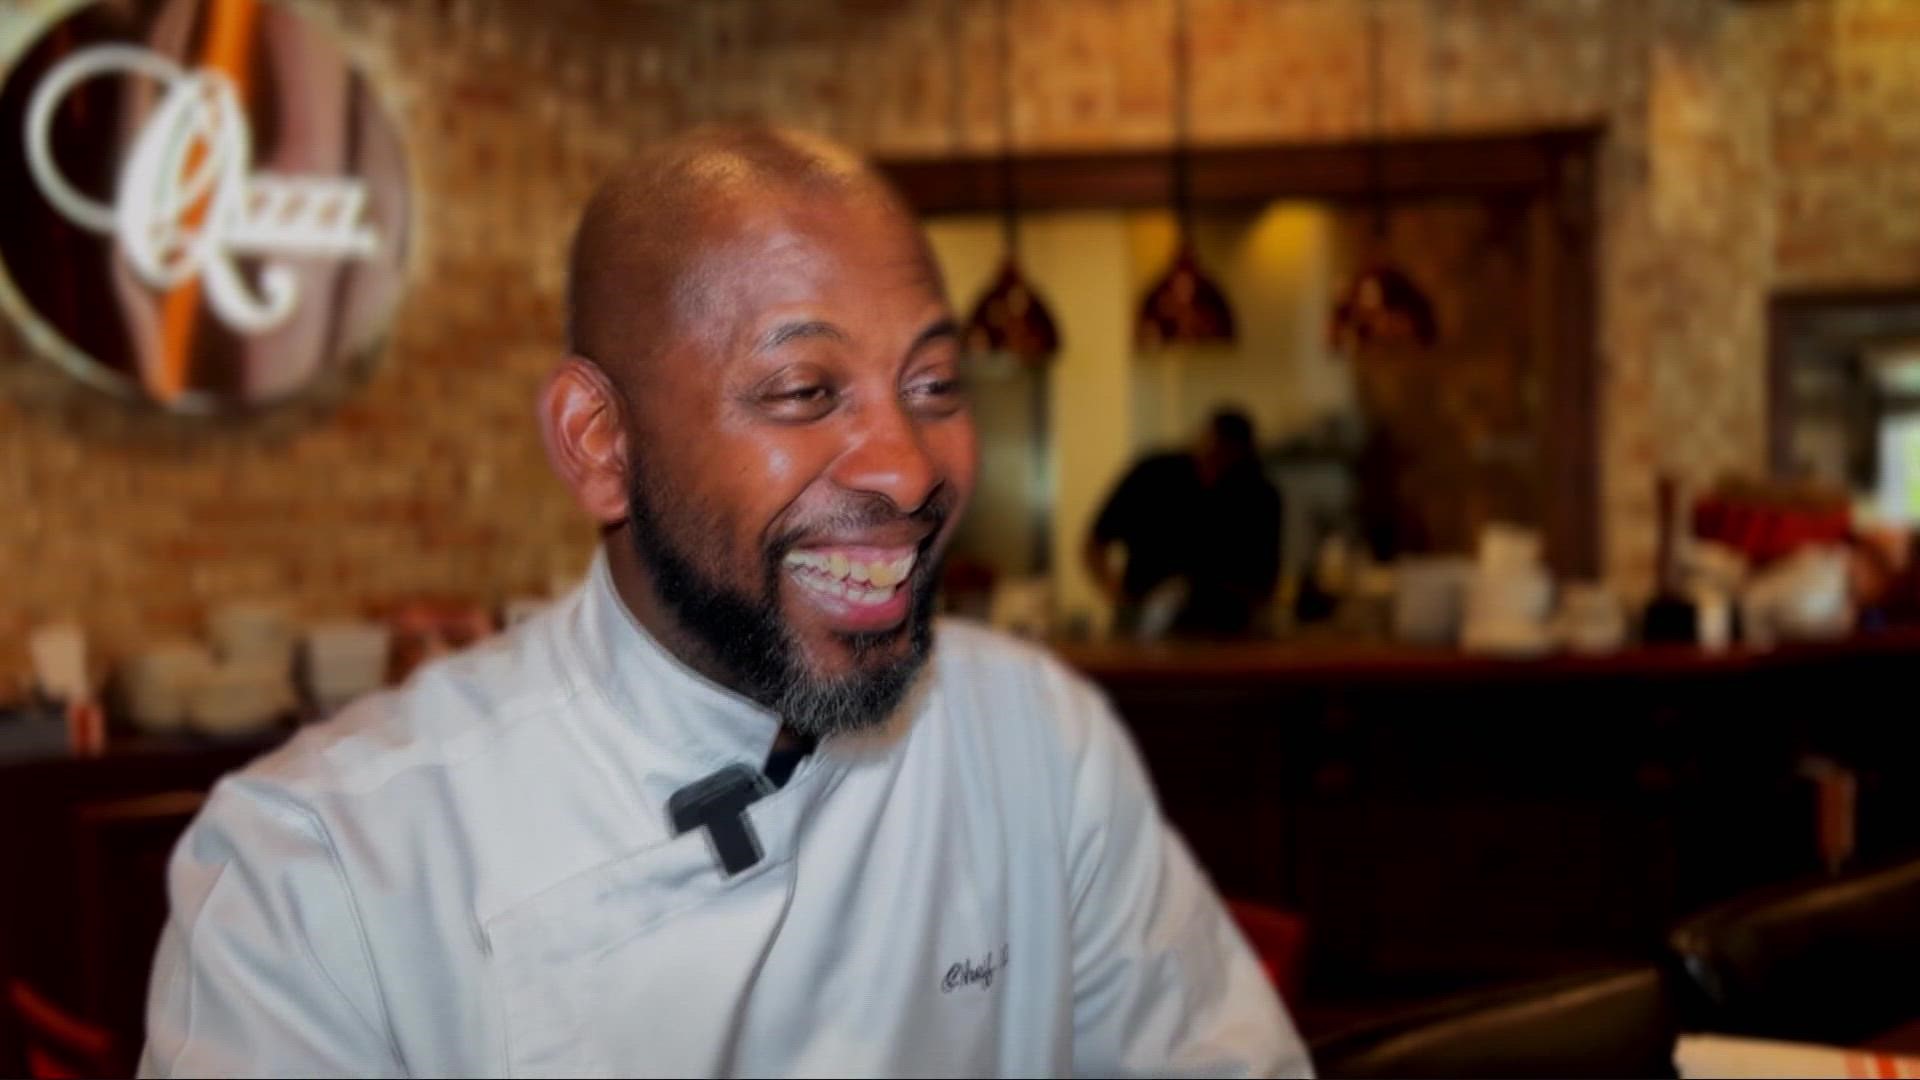 This years line up features award winning Chef Q Bennett of Q1227, the restaurant named for his birthday.